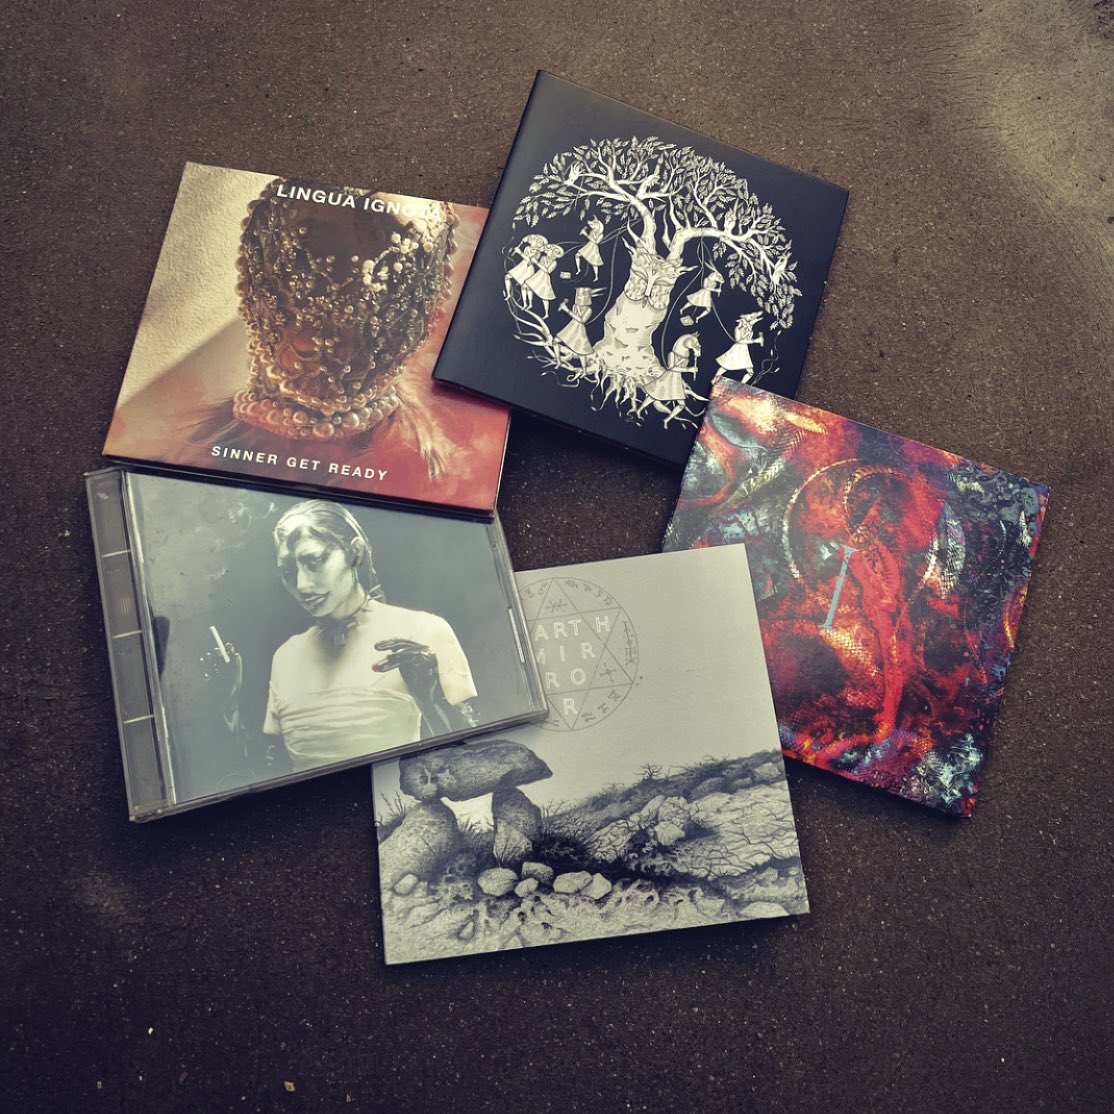 2021 has been an amazing year for albums, here are my favorite 5 releases… @LINGUA_IGNOTA_ , @gazelletwin & @nyx_edc , @Convergecult & @CCHELSEAWWOLFE , @hawthonn , @kngwmn